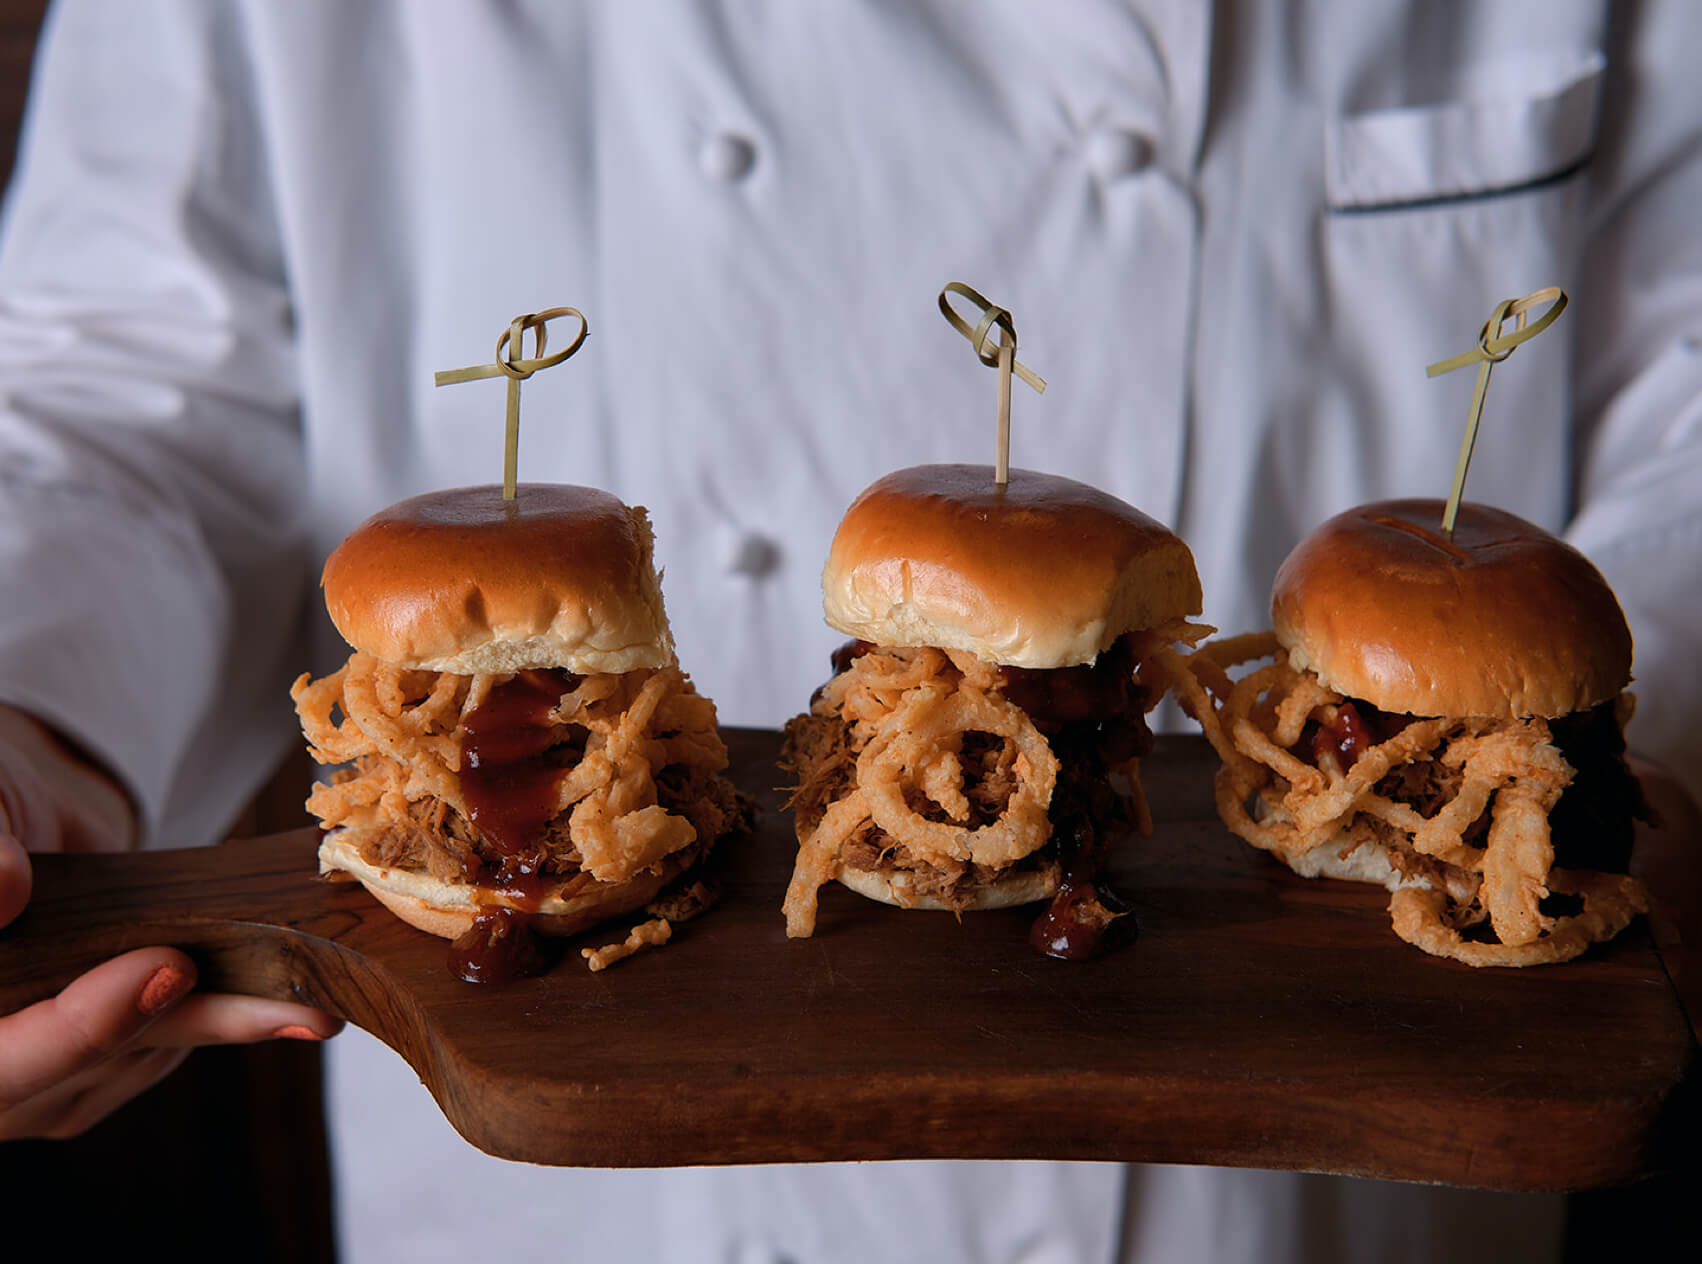 Tangled Roots chef in white chef's coat holding plate of three pork sliders with onion strings and barbeque sauce